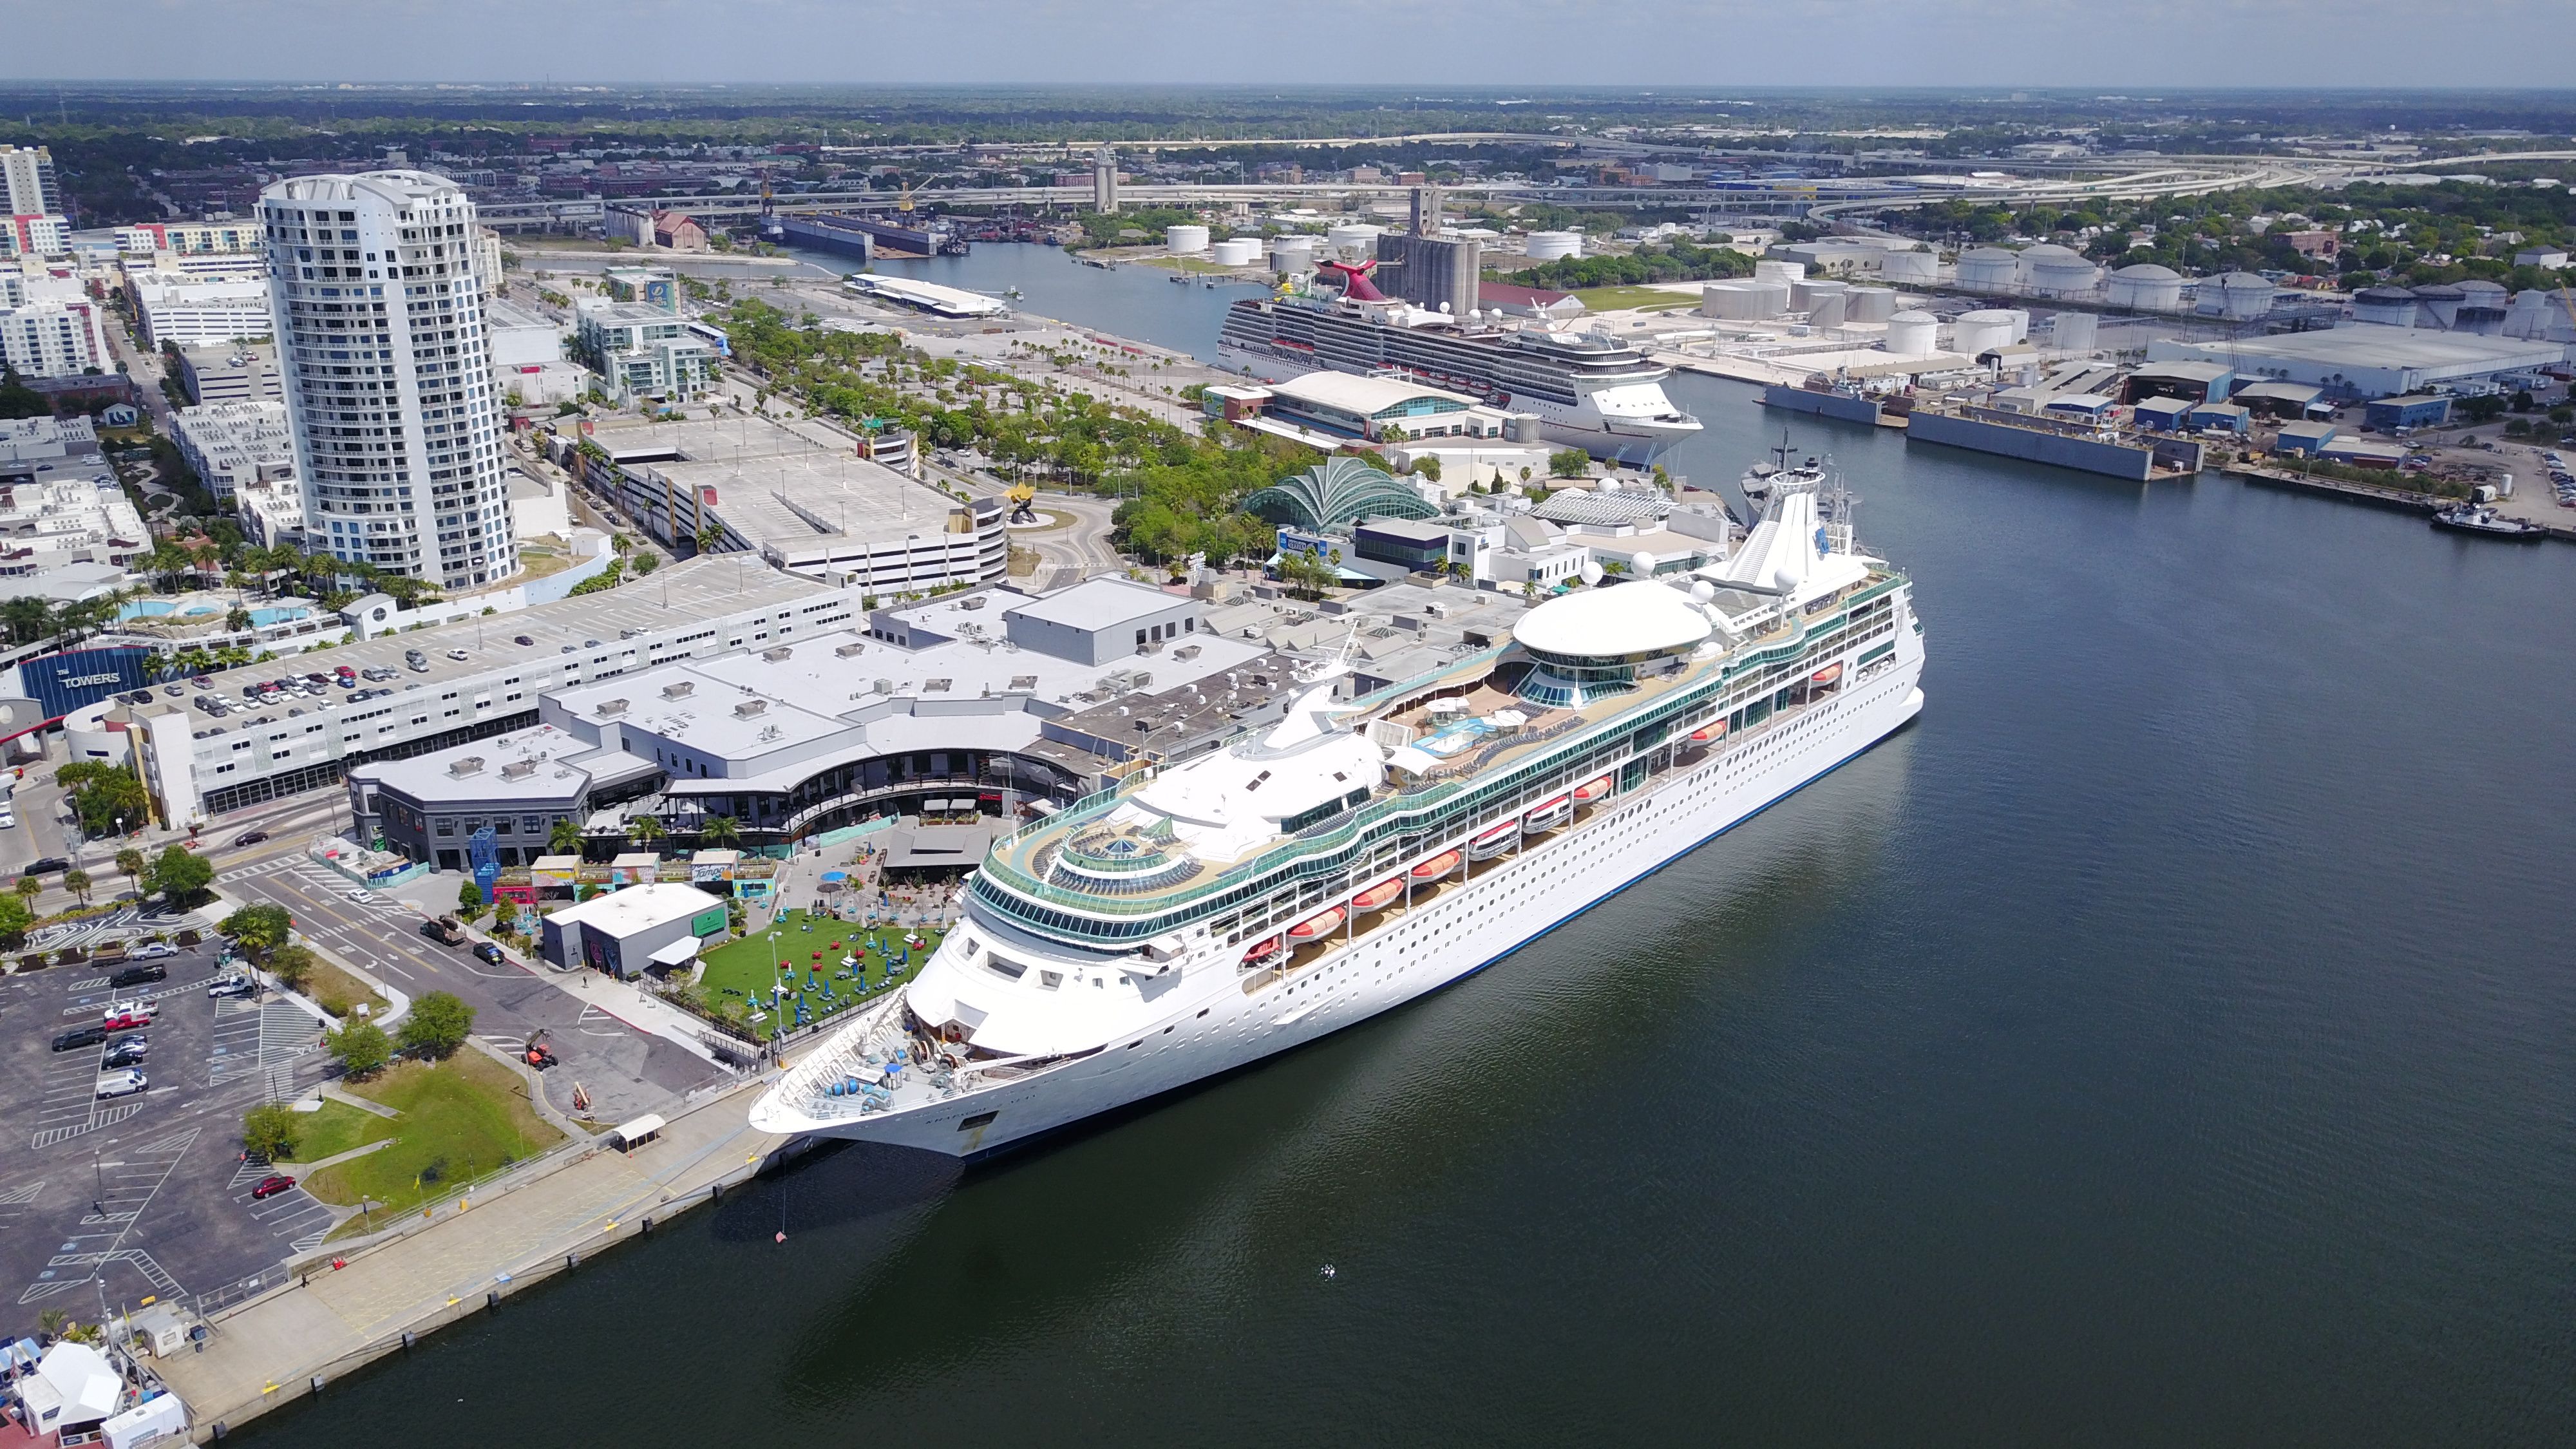 A Royal Caribbean cruise ship docked at Port Tampa Bay, surrounded by city buildings and port facilities under a clear sky.